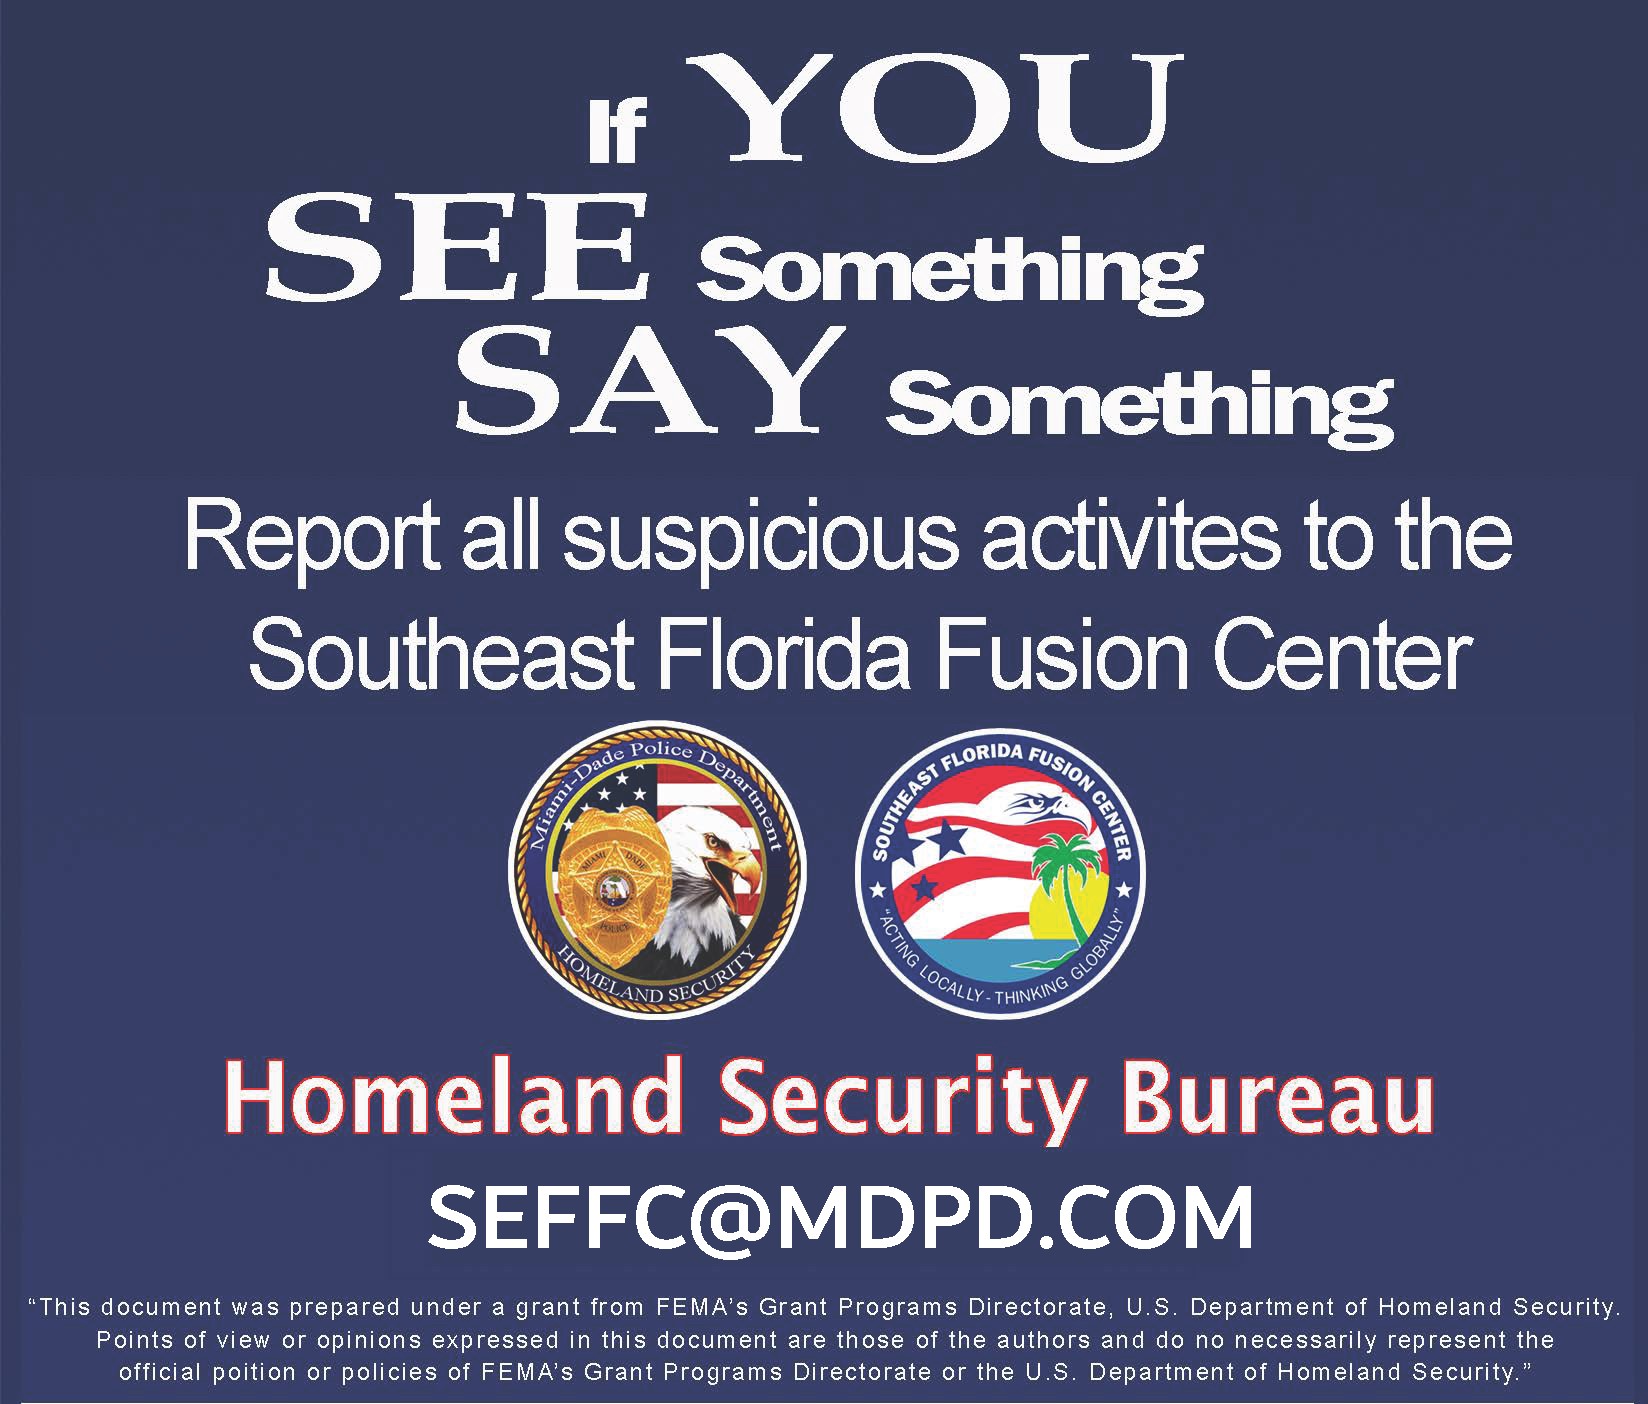 See something say something. I watch south florida dot com. Report any suspicious activities to the Southeast Florida Fusion Center. The email address is seffc@mdpd.com